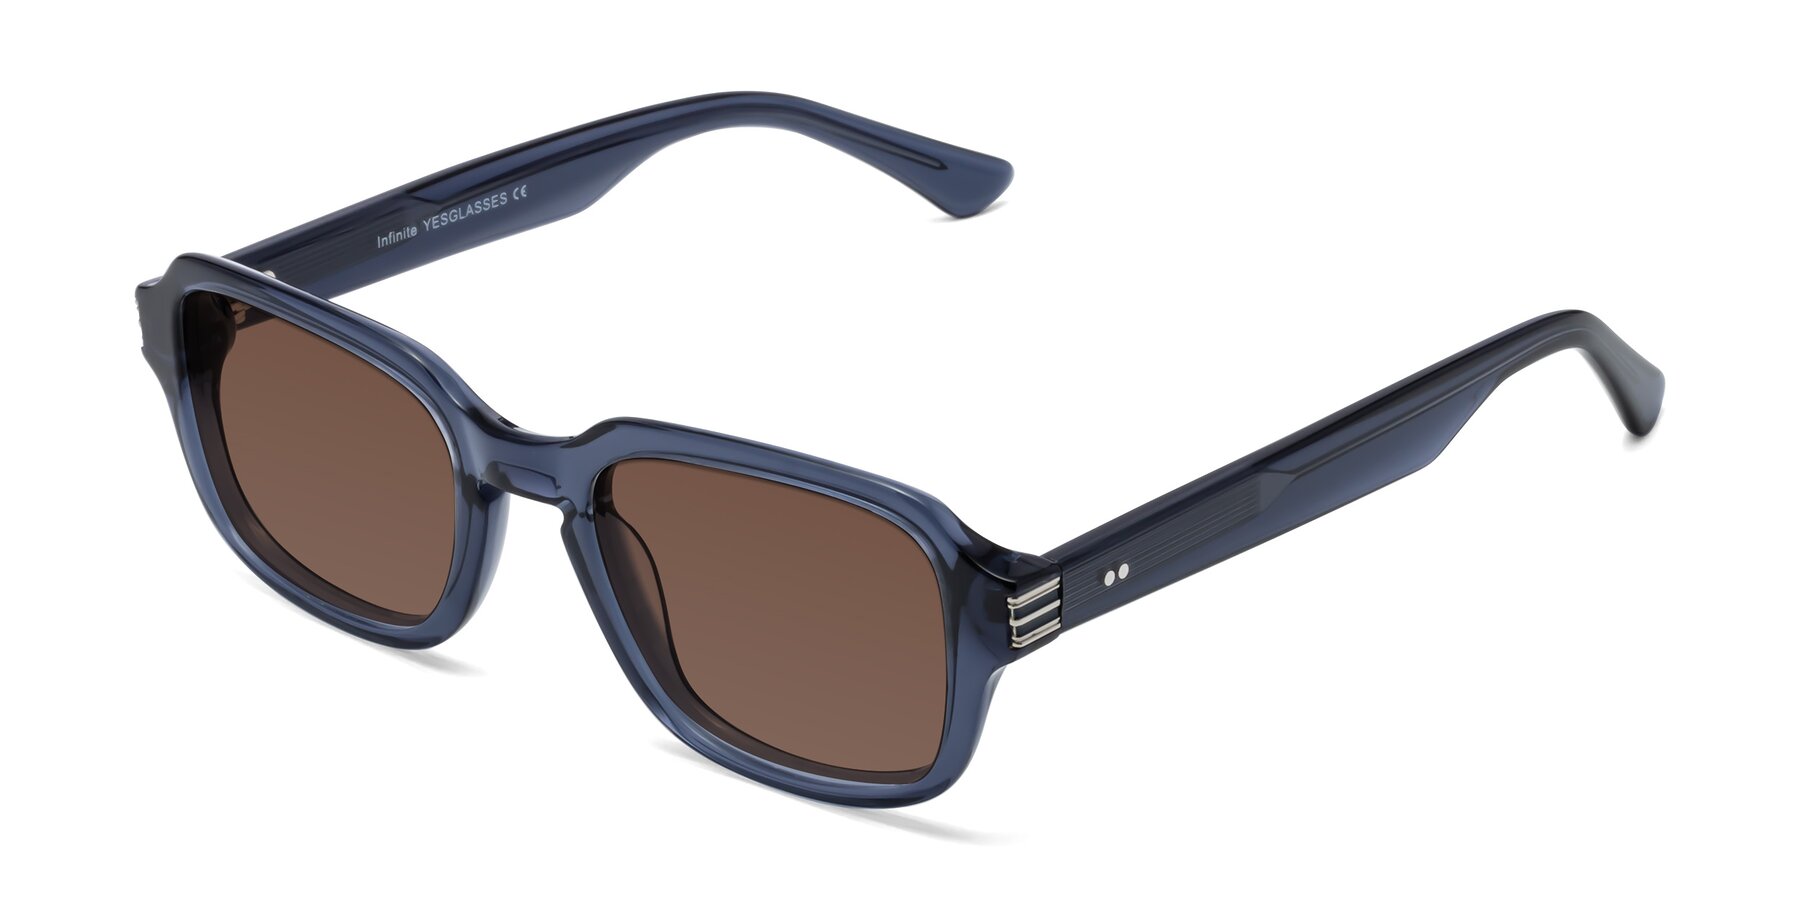 Angle of Infinite in Dark Blue with Brown Tinted Lenses